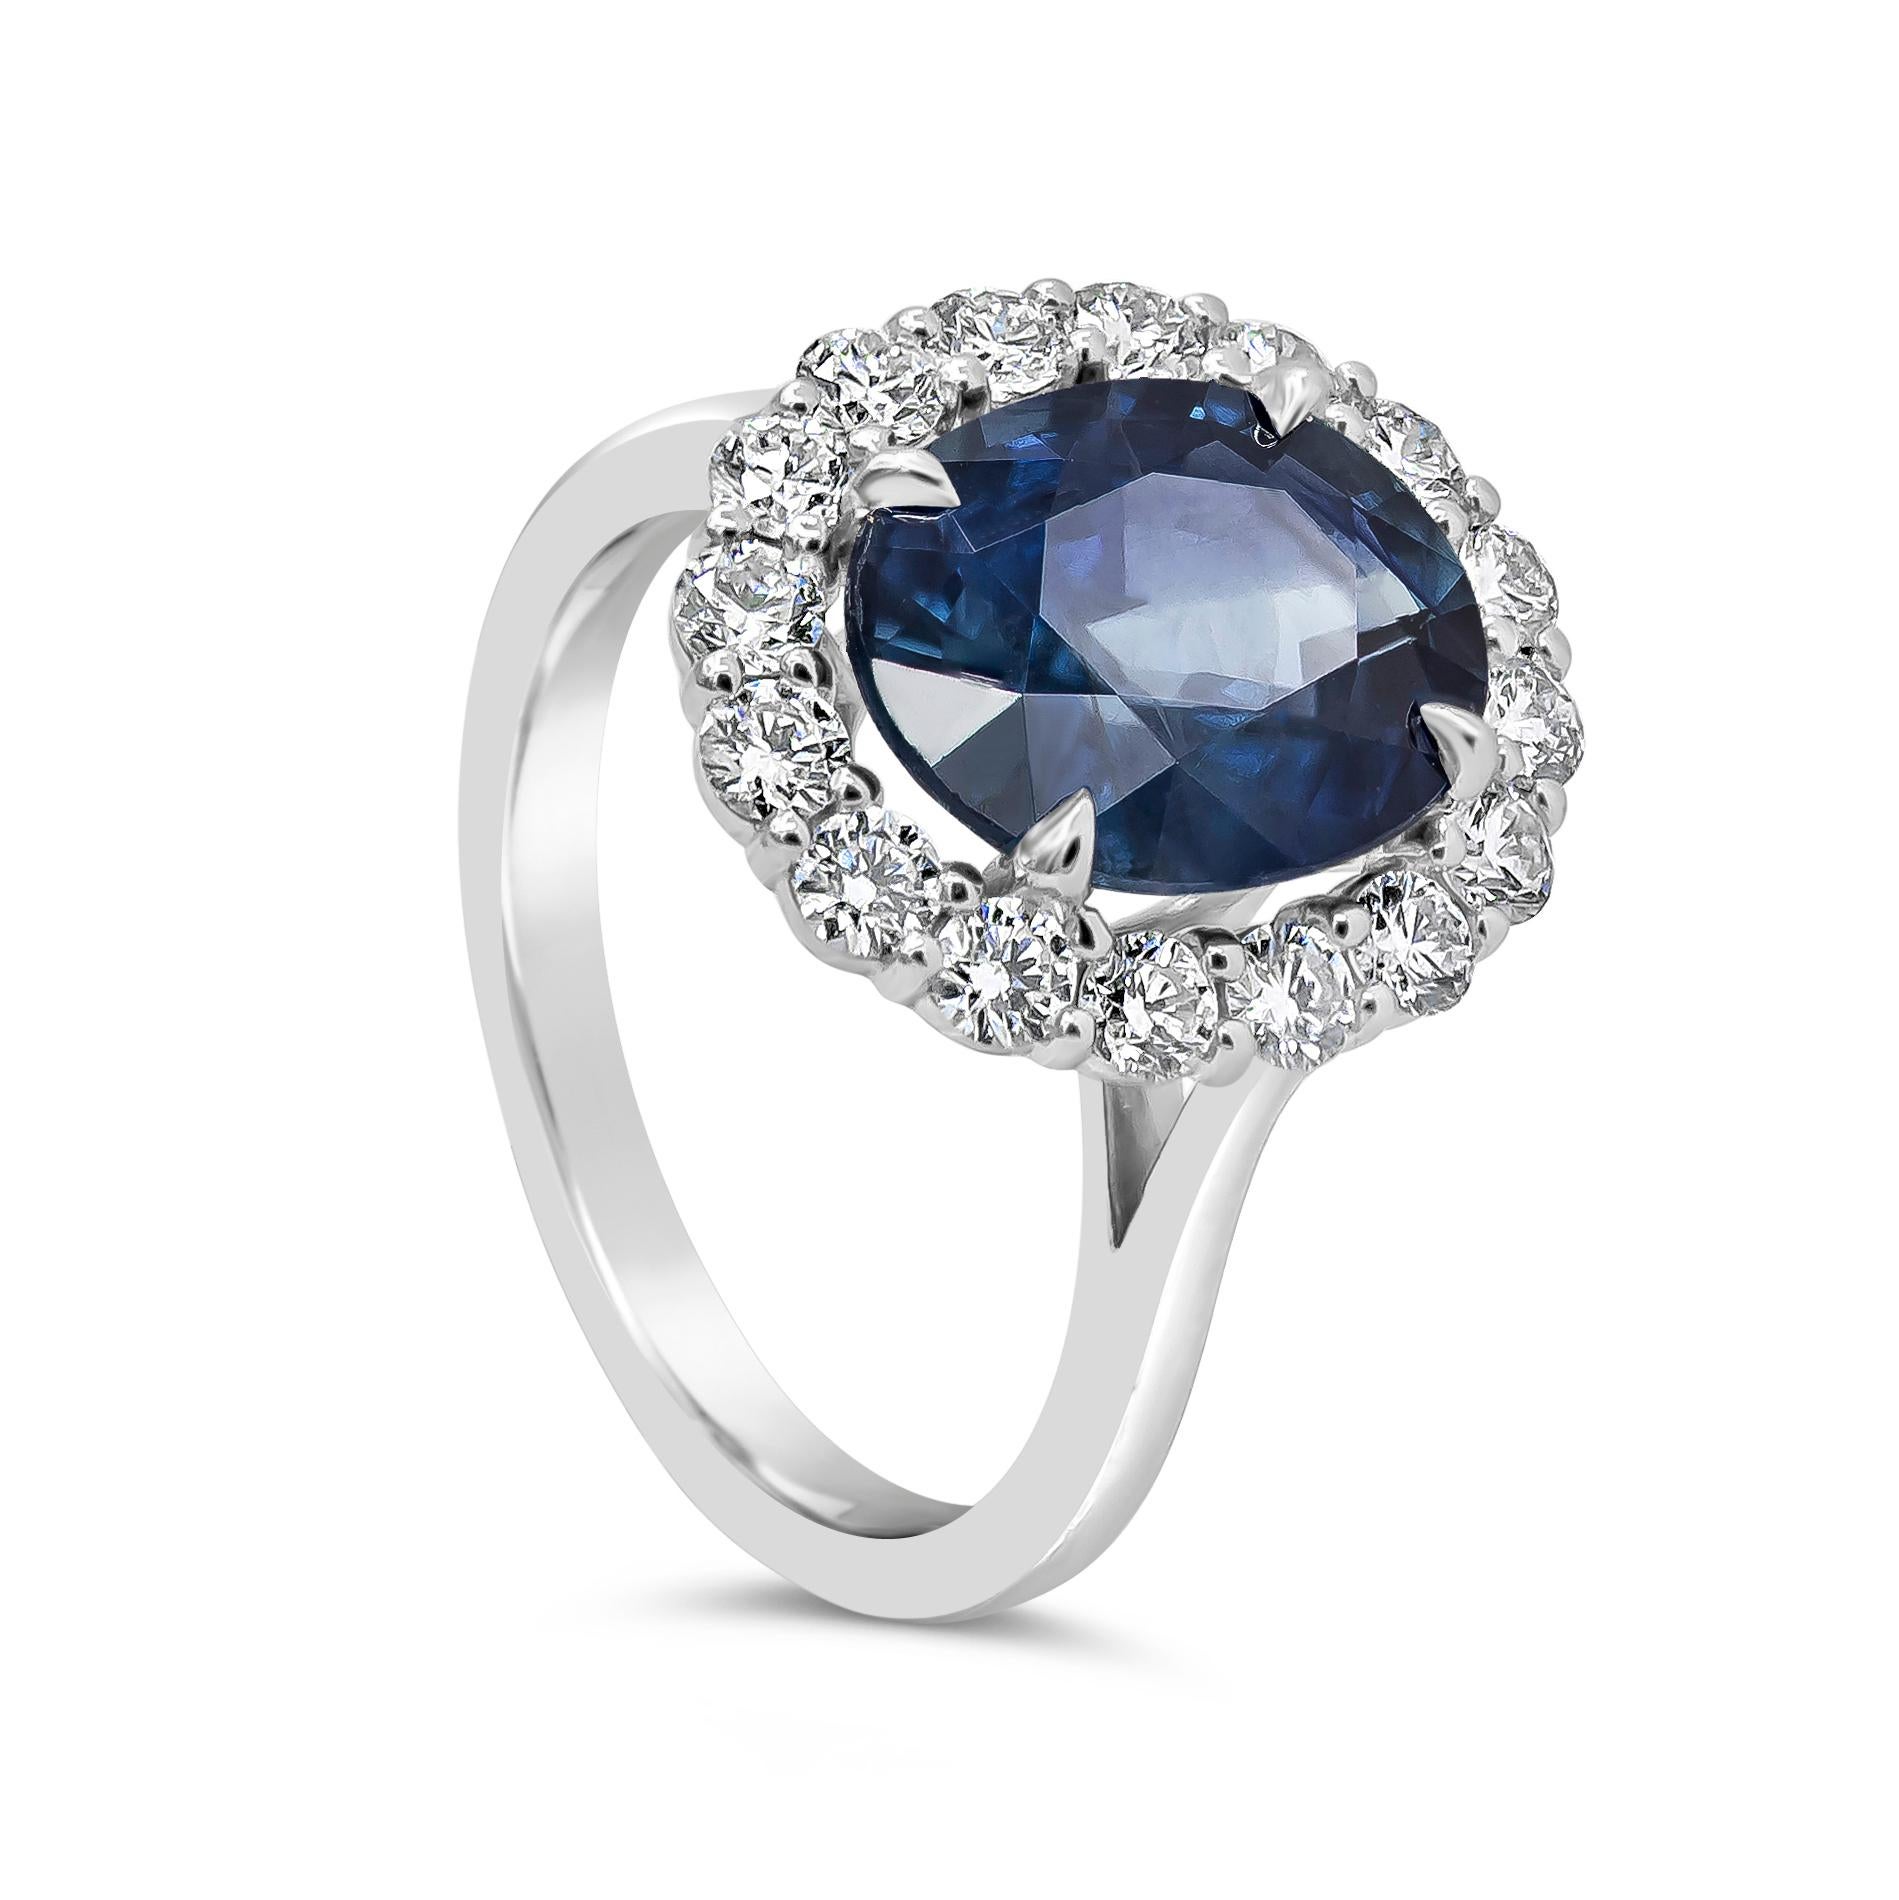 Showcasing a 4.40 carat oval cut blue sapphire, elegantly set in a brilliant diamond halo weighing 0.85 carats total. Set it in an 18 karat white gold mounting. Size 7 US. 

Style available in different price ranges. Prices are based on your